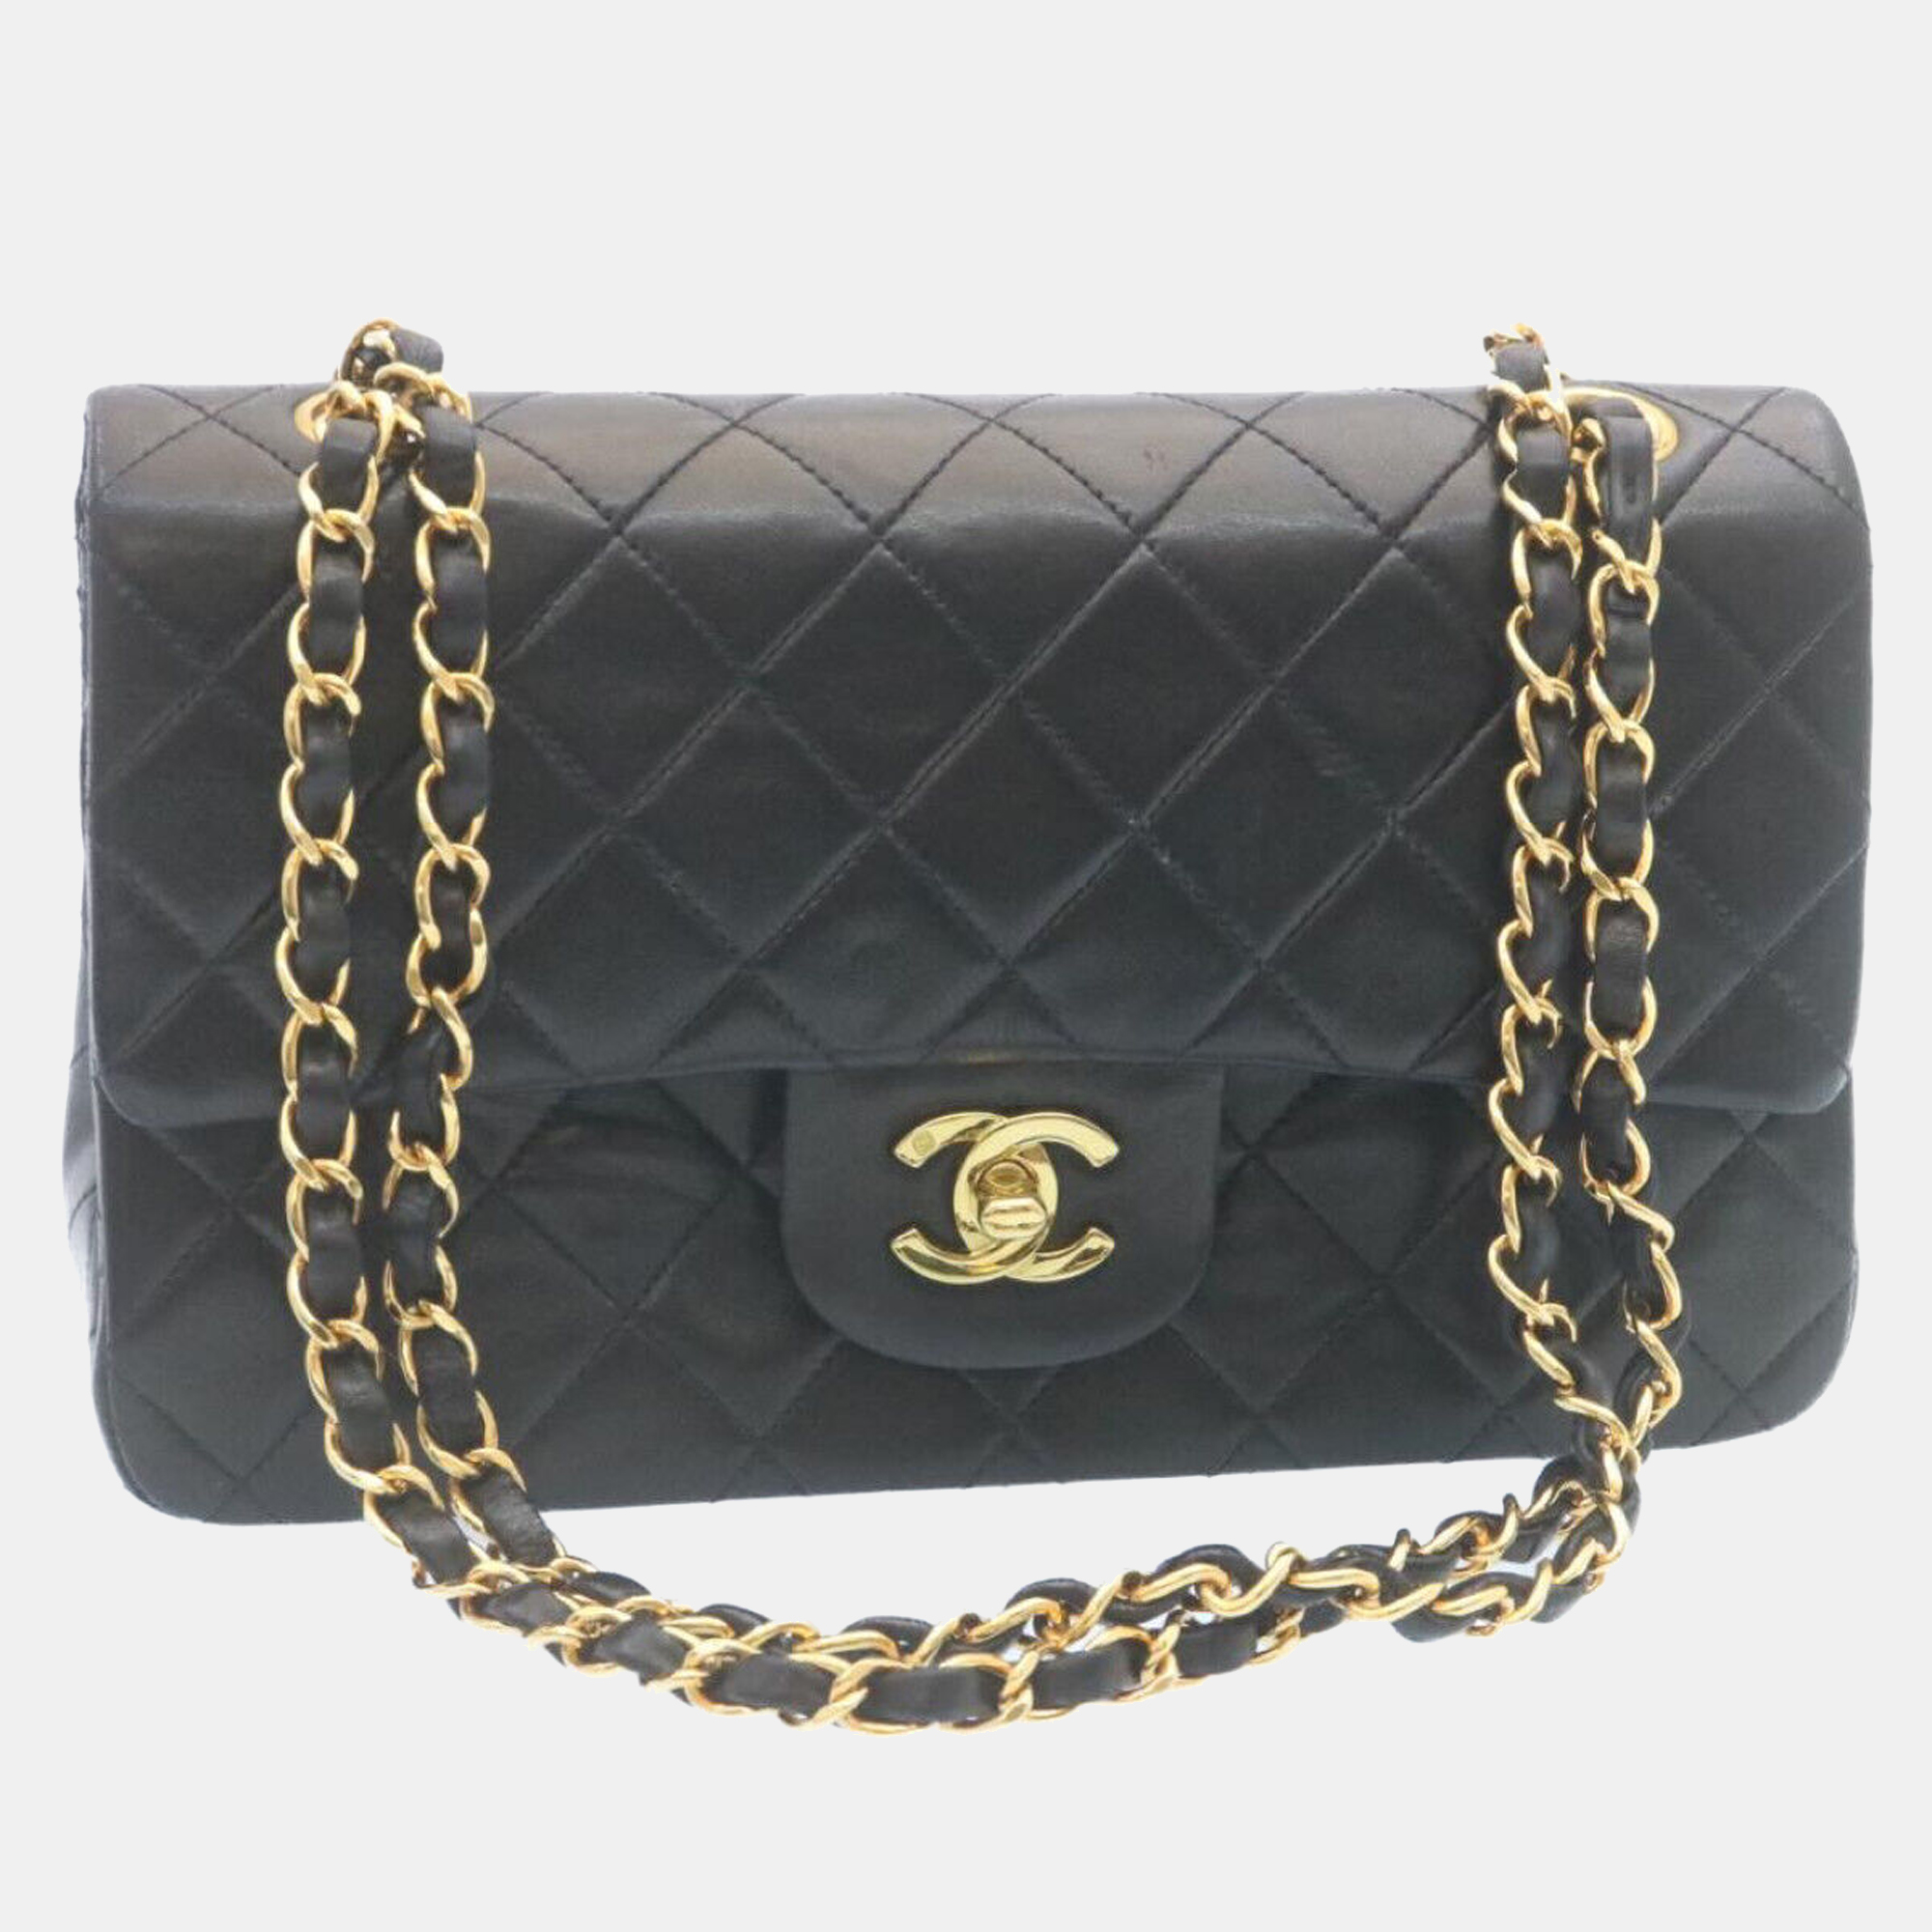 Chanel black lambskin leather classic double flap bag